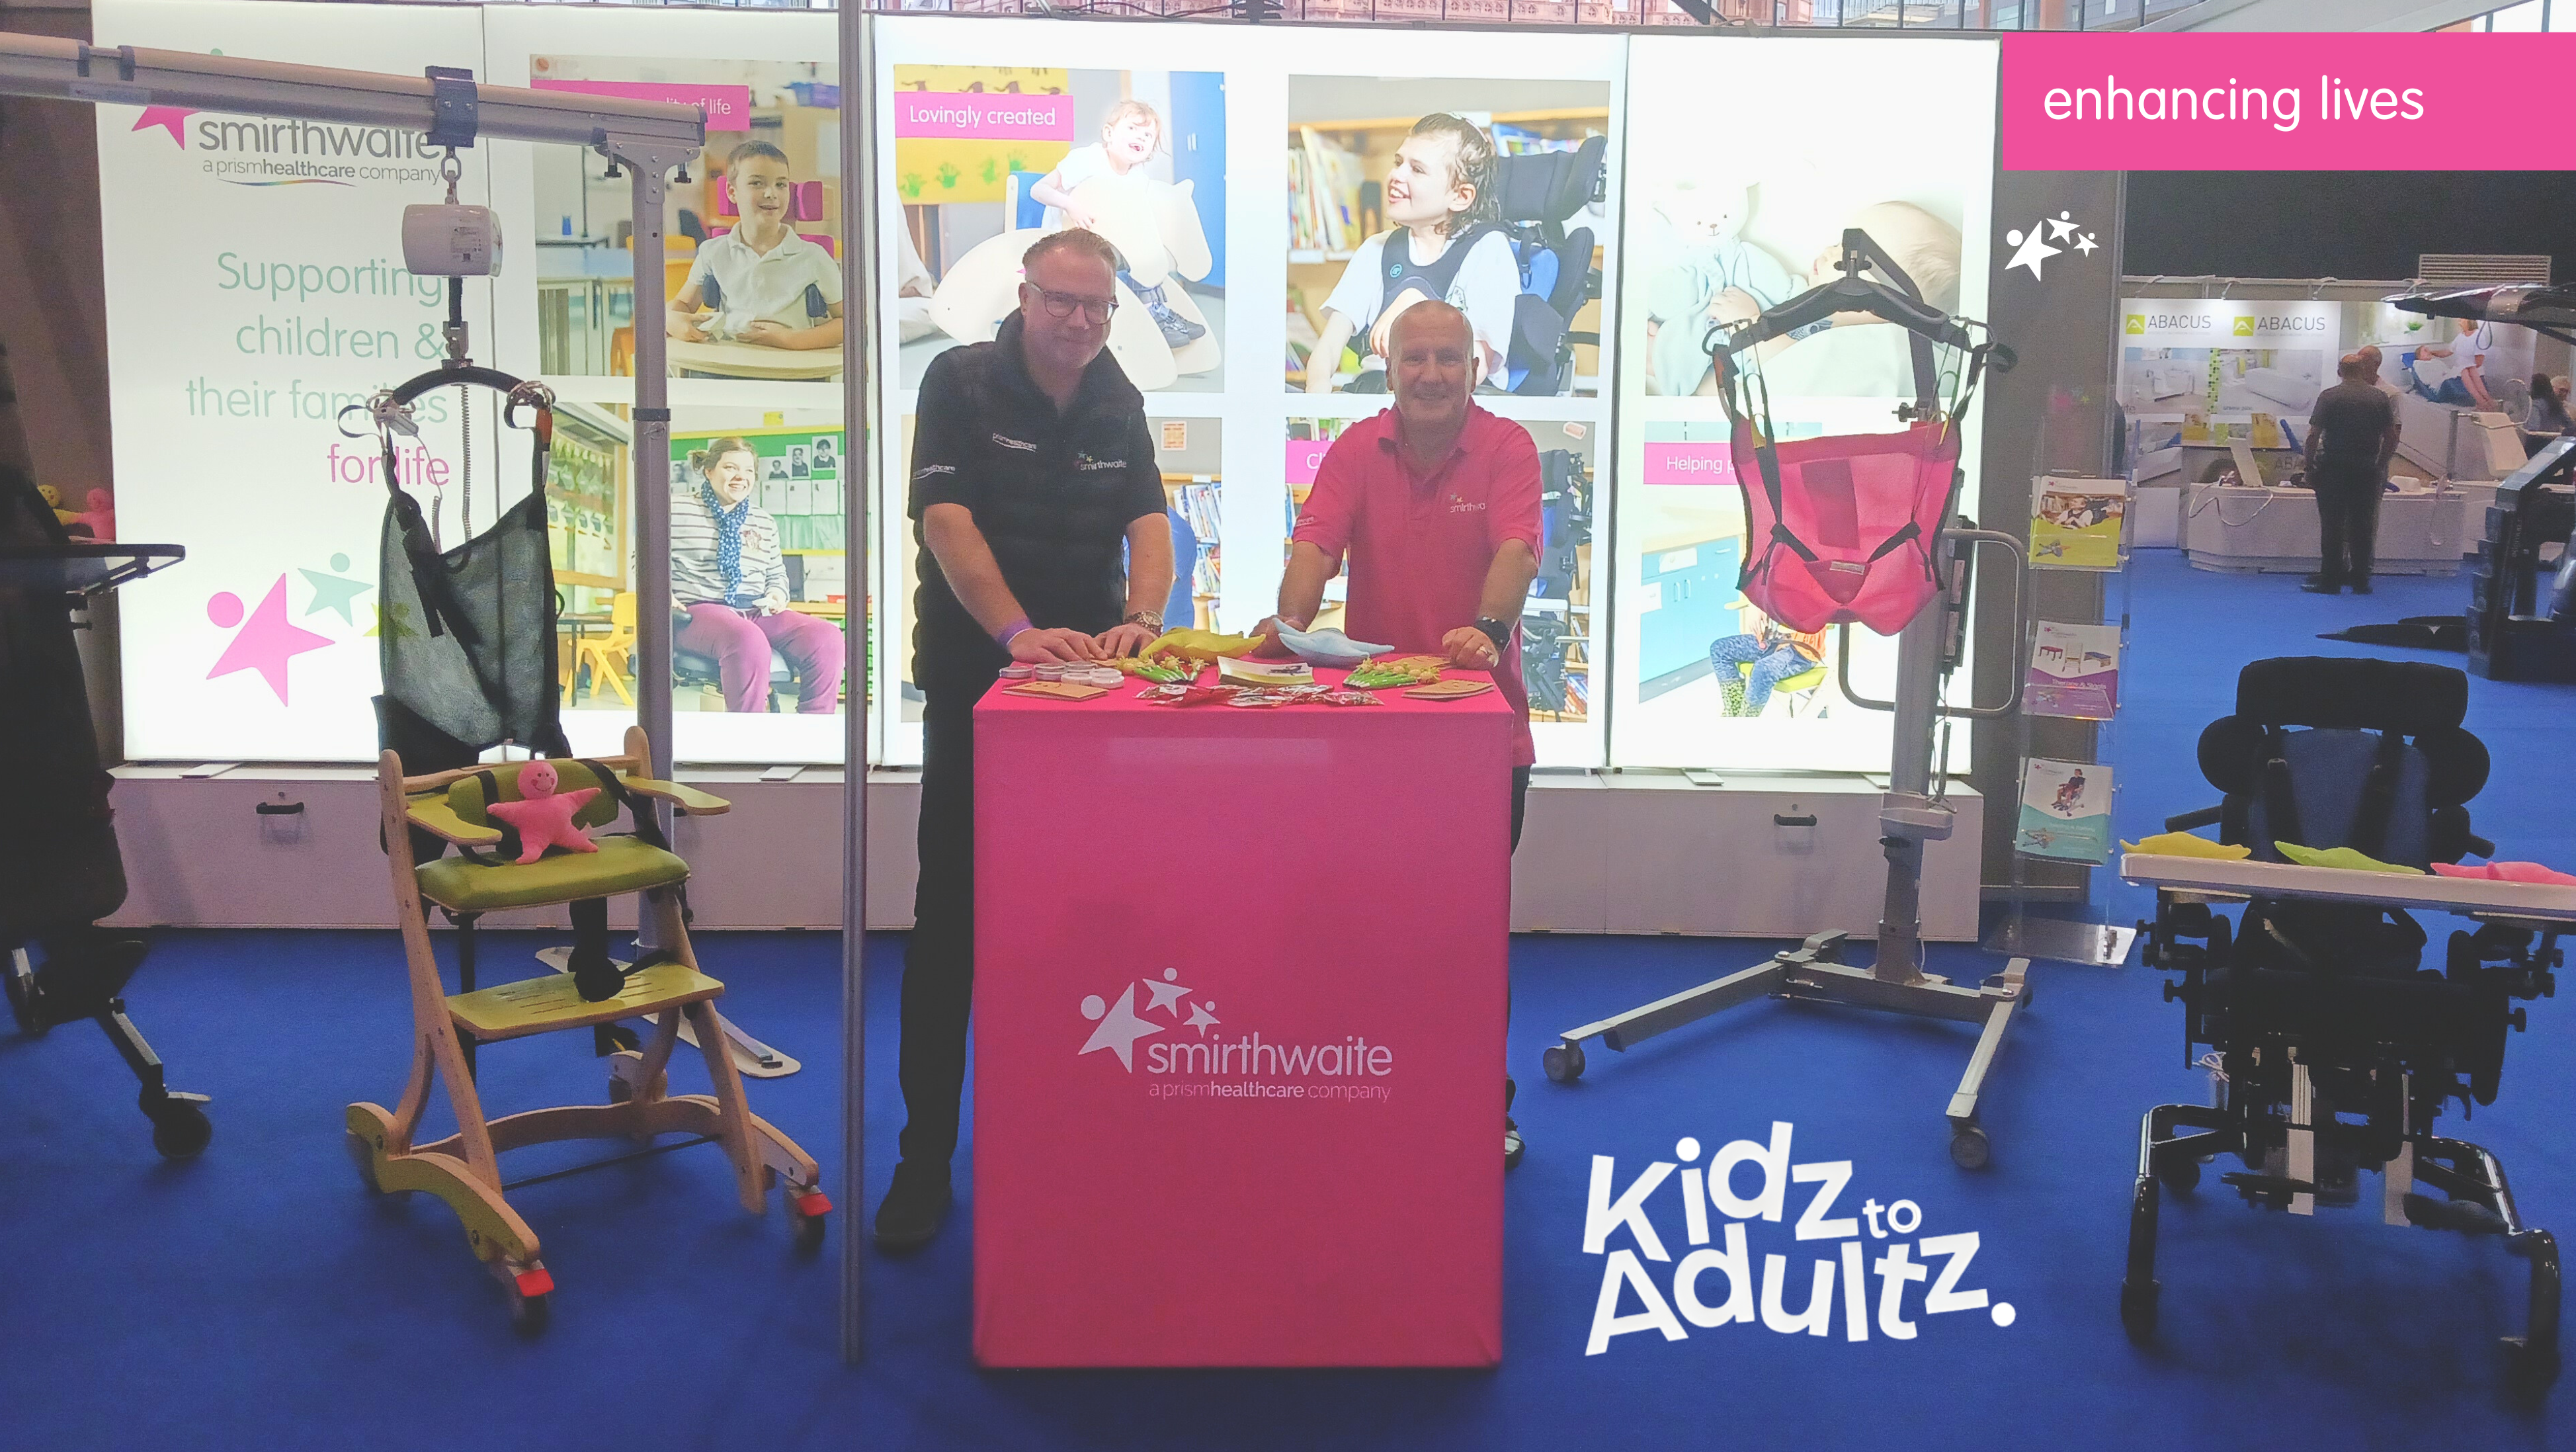 Thanks for visiting us at Kidz to Adultz North